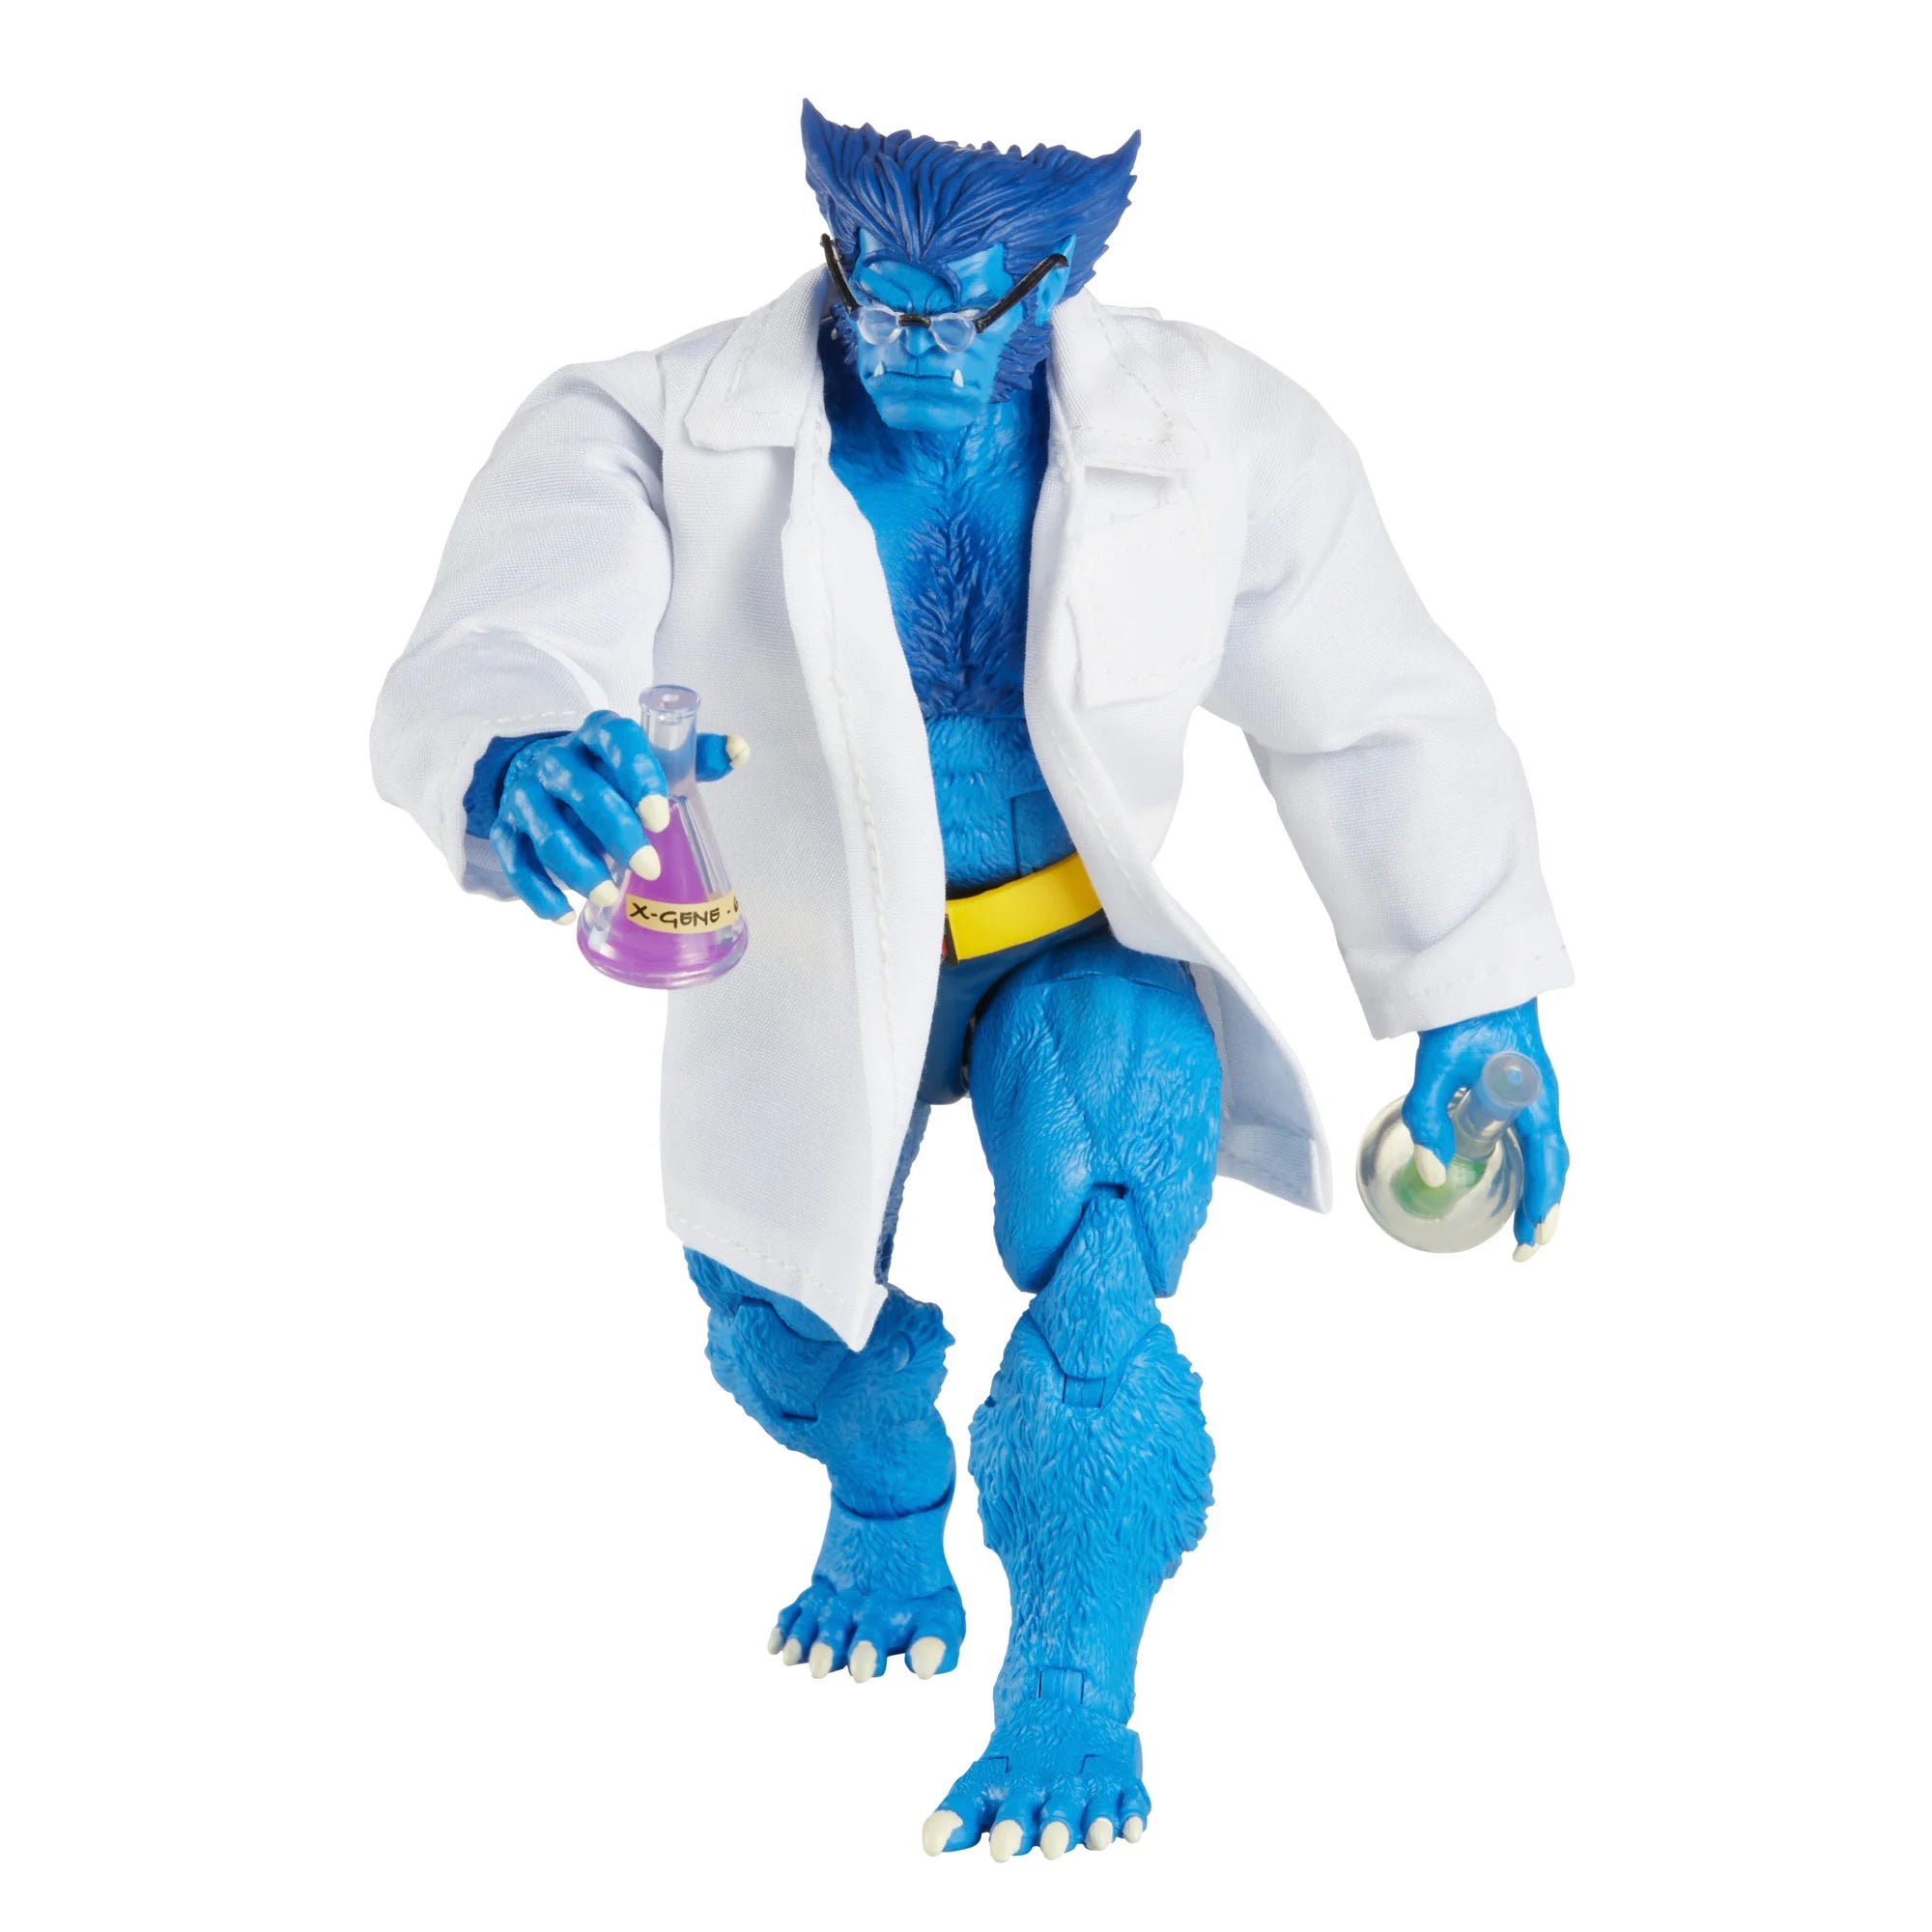  Diamond Select Toys Marvel Select Beast Action Figure : Toys &  Games